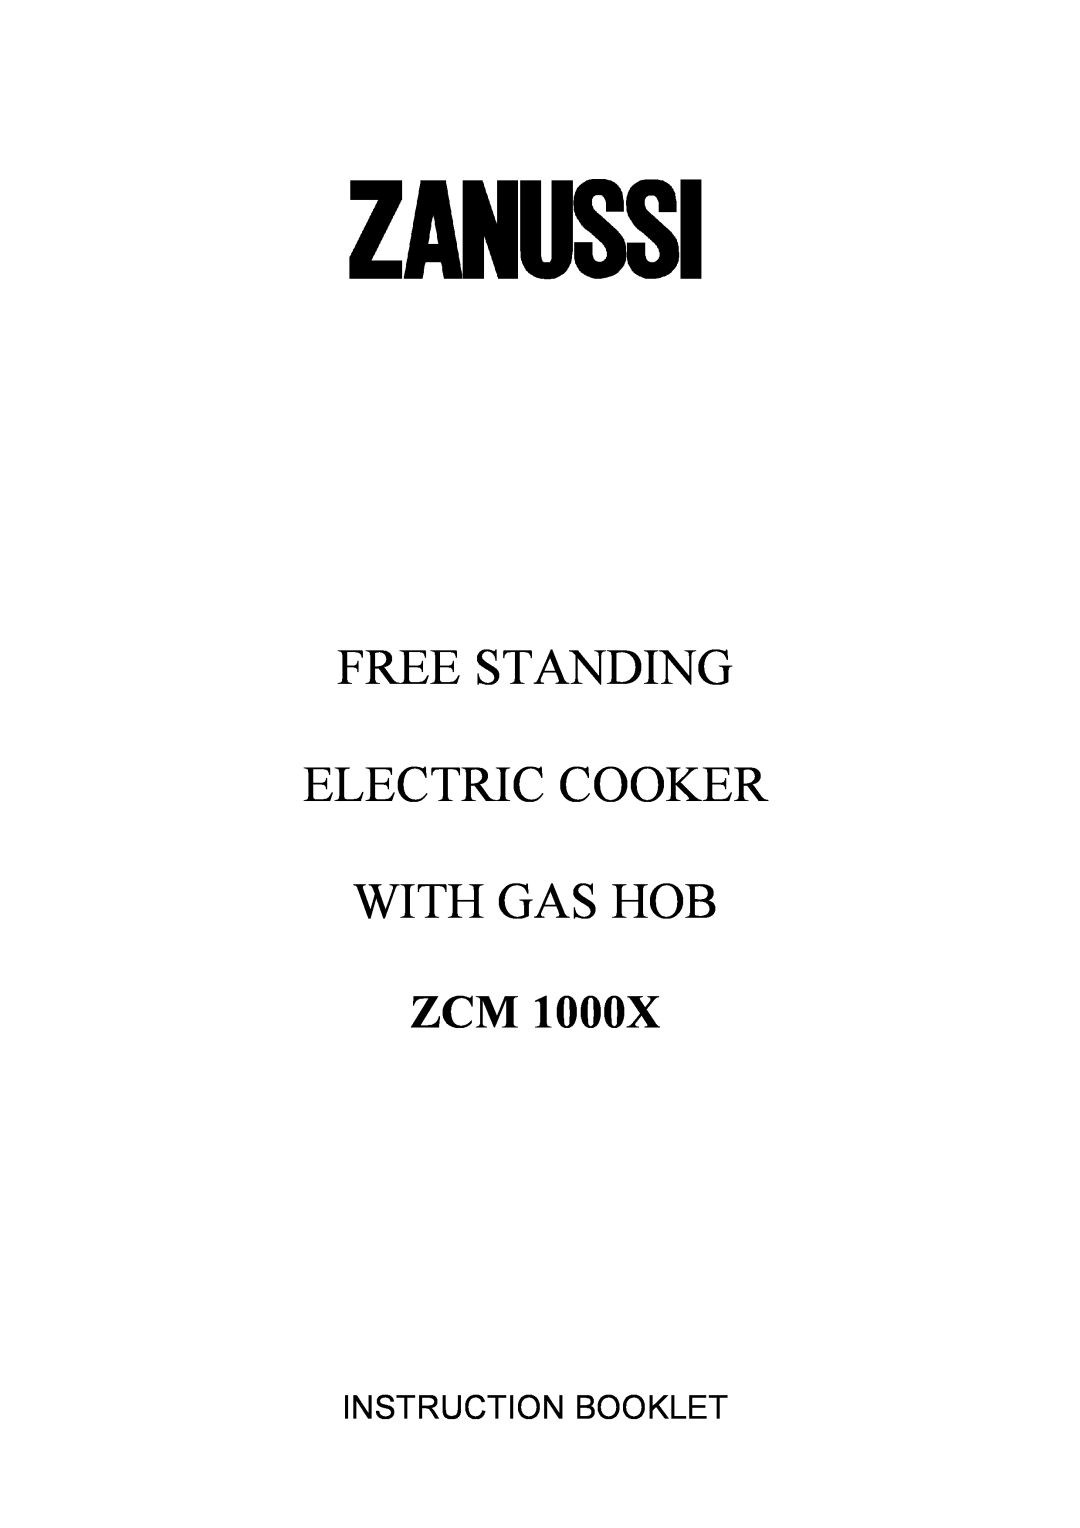 Zanussi ZCM 1000X manual Free Standing Electric Cooker With Gas Hob, Instruction Booklet 